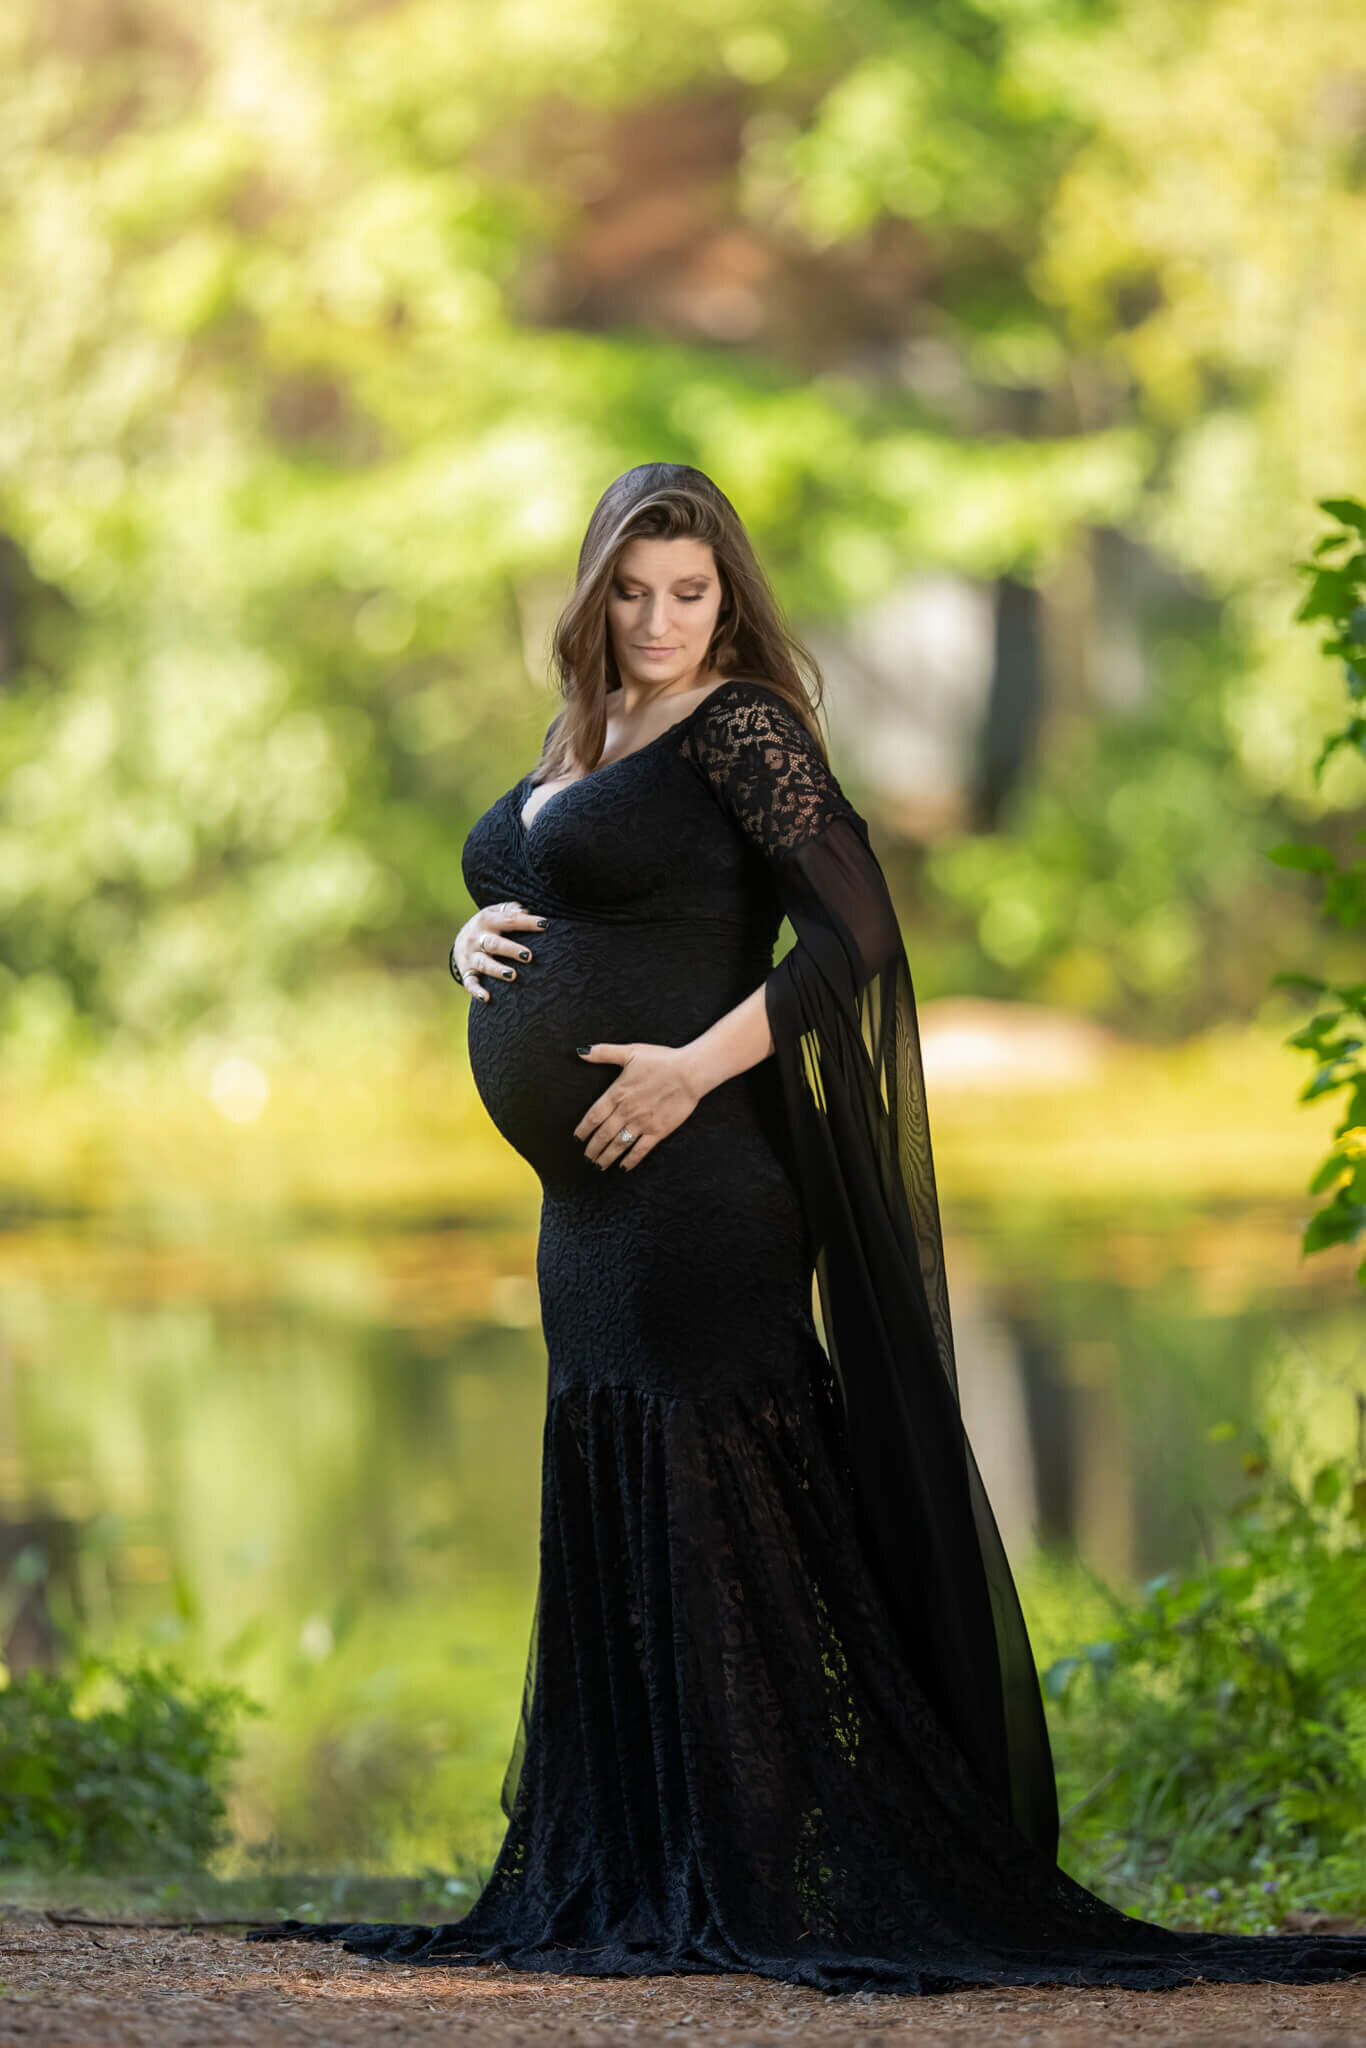 Pregnant mother in black gown with lace sleeves looking down at her baby bump